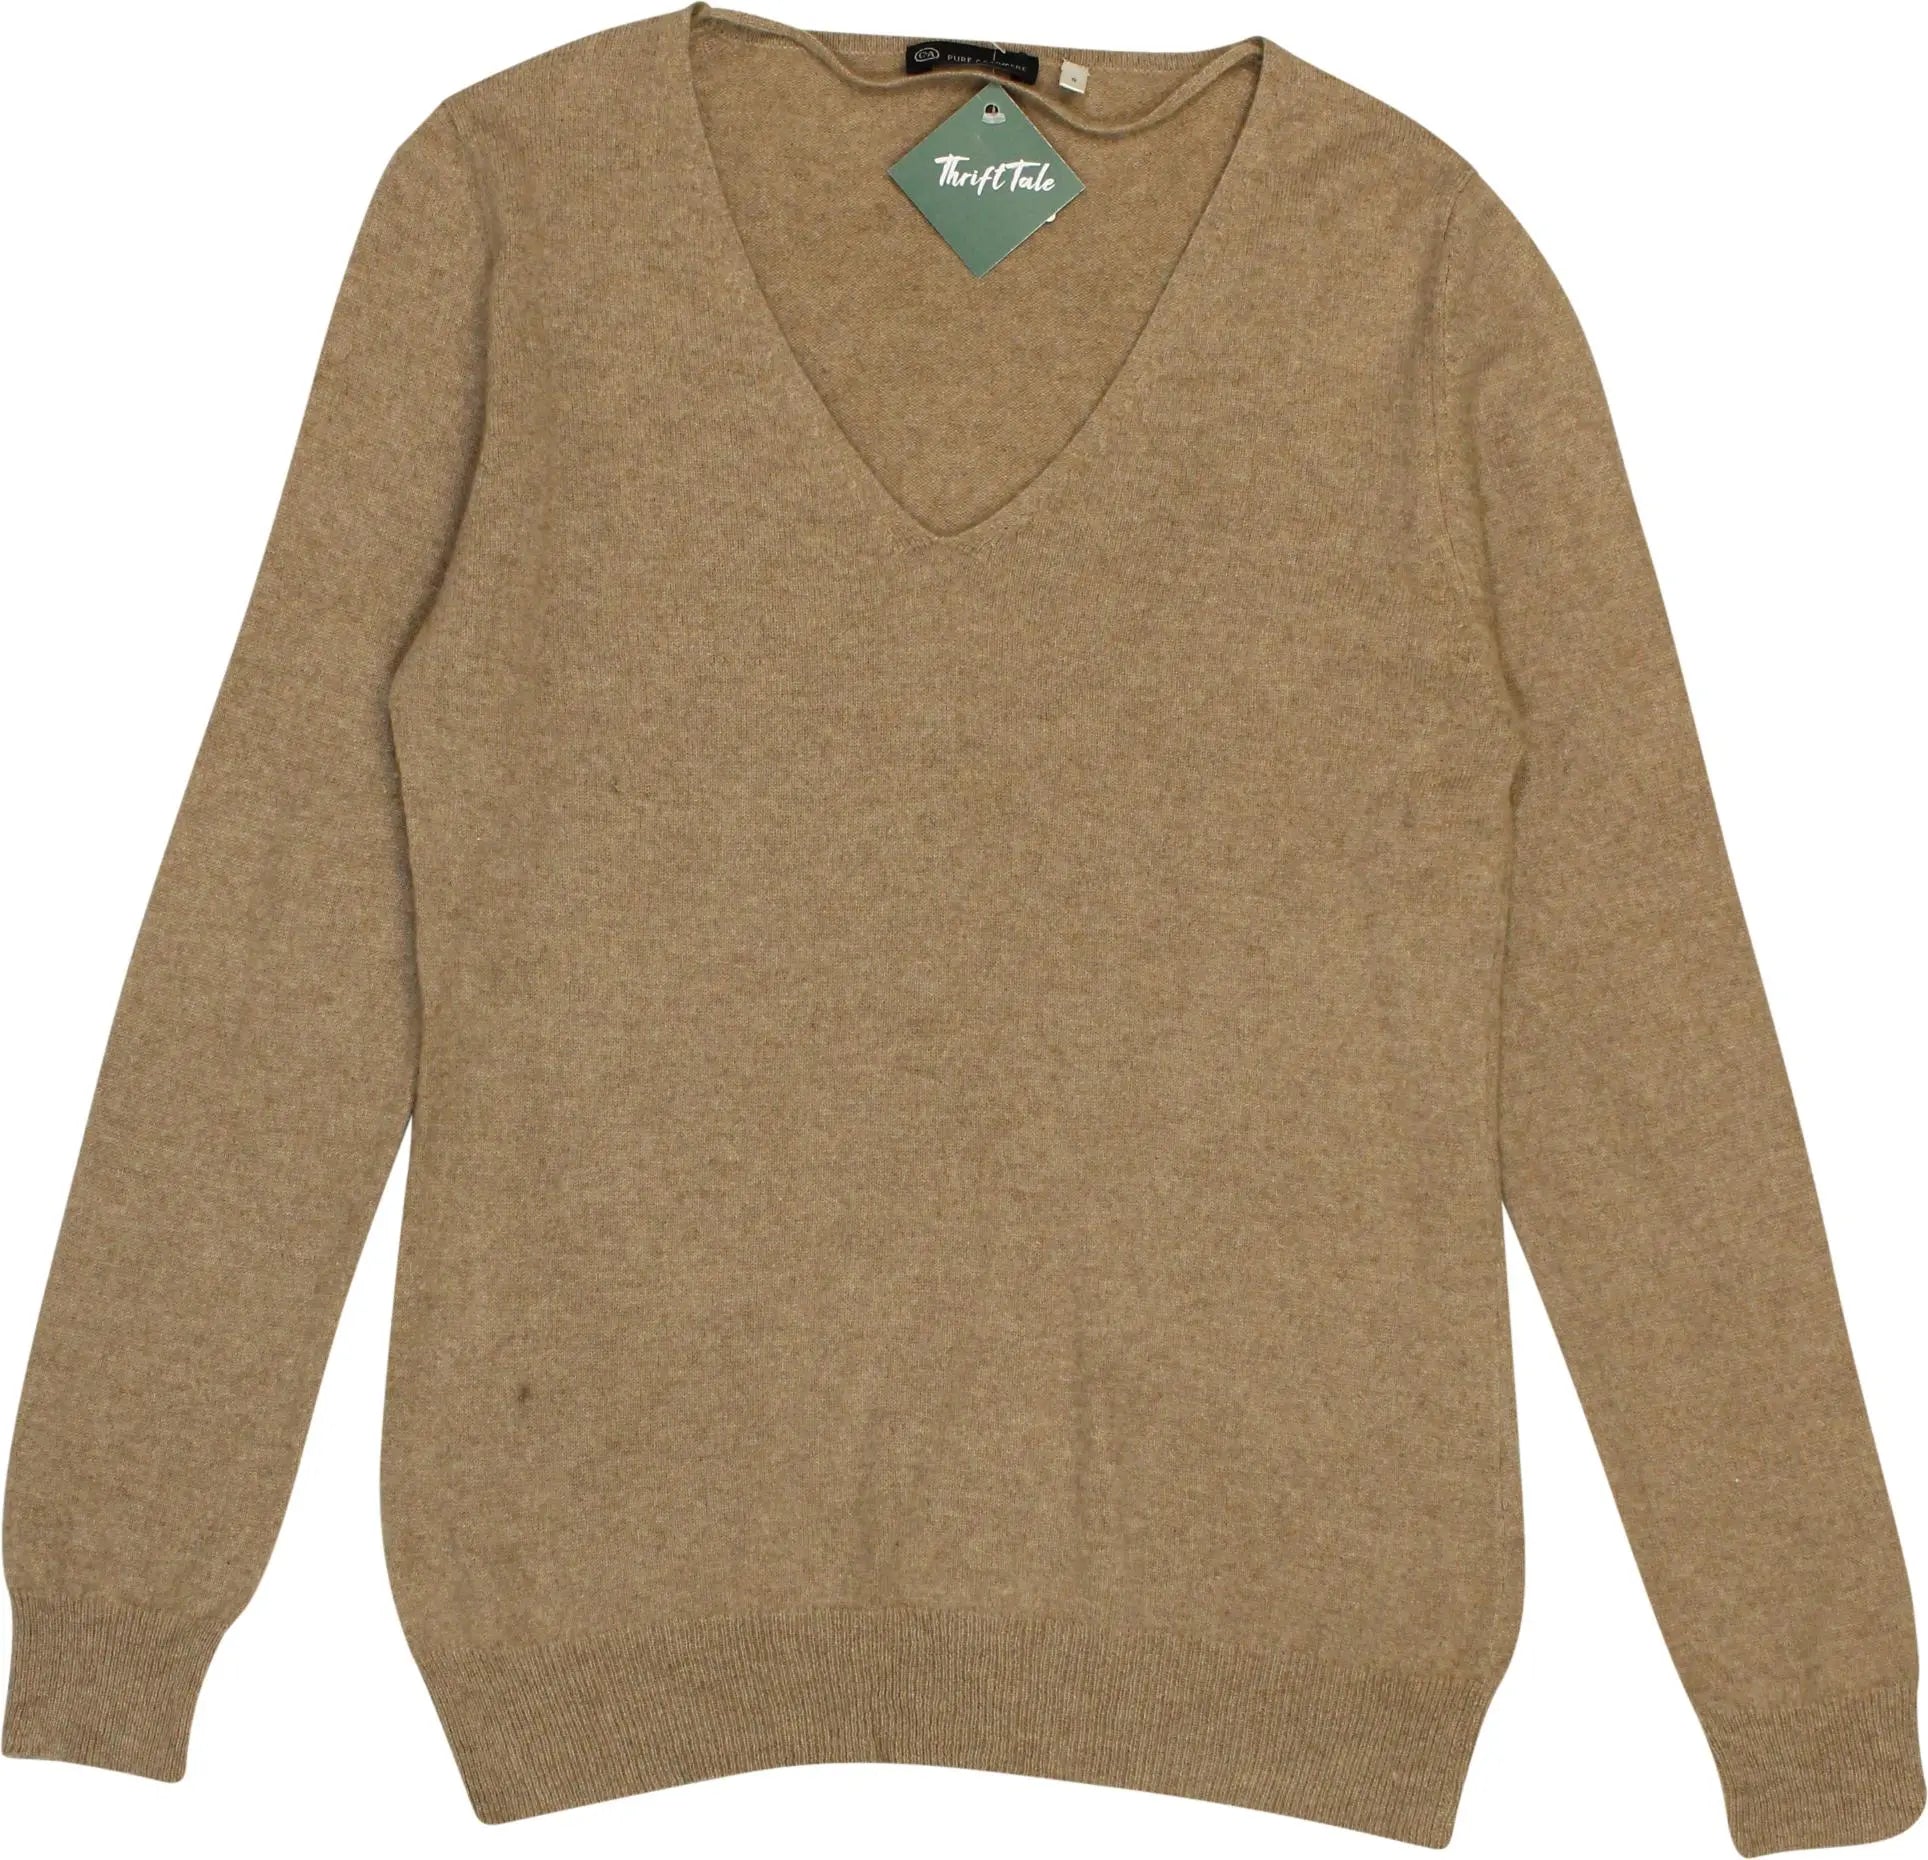 C&A - Brown Cashmere Jumper- ThriftTale.com - Vintage and second handclothing